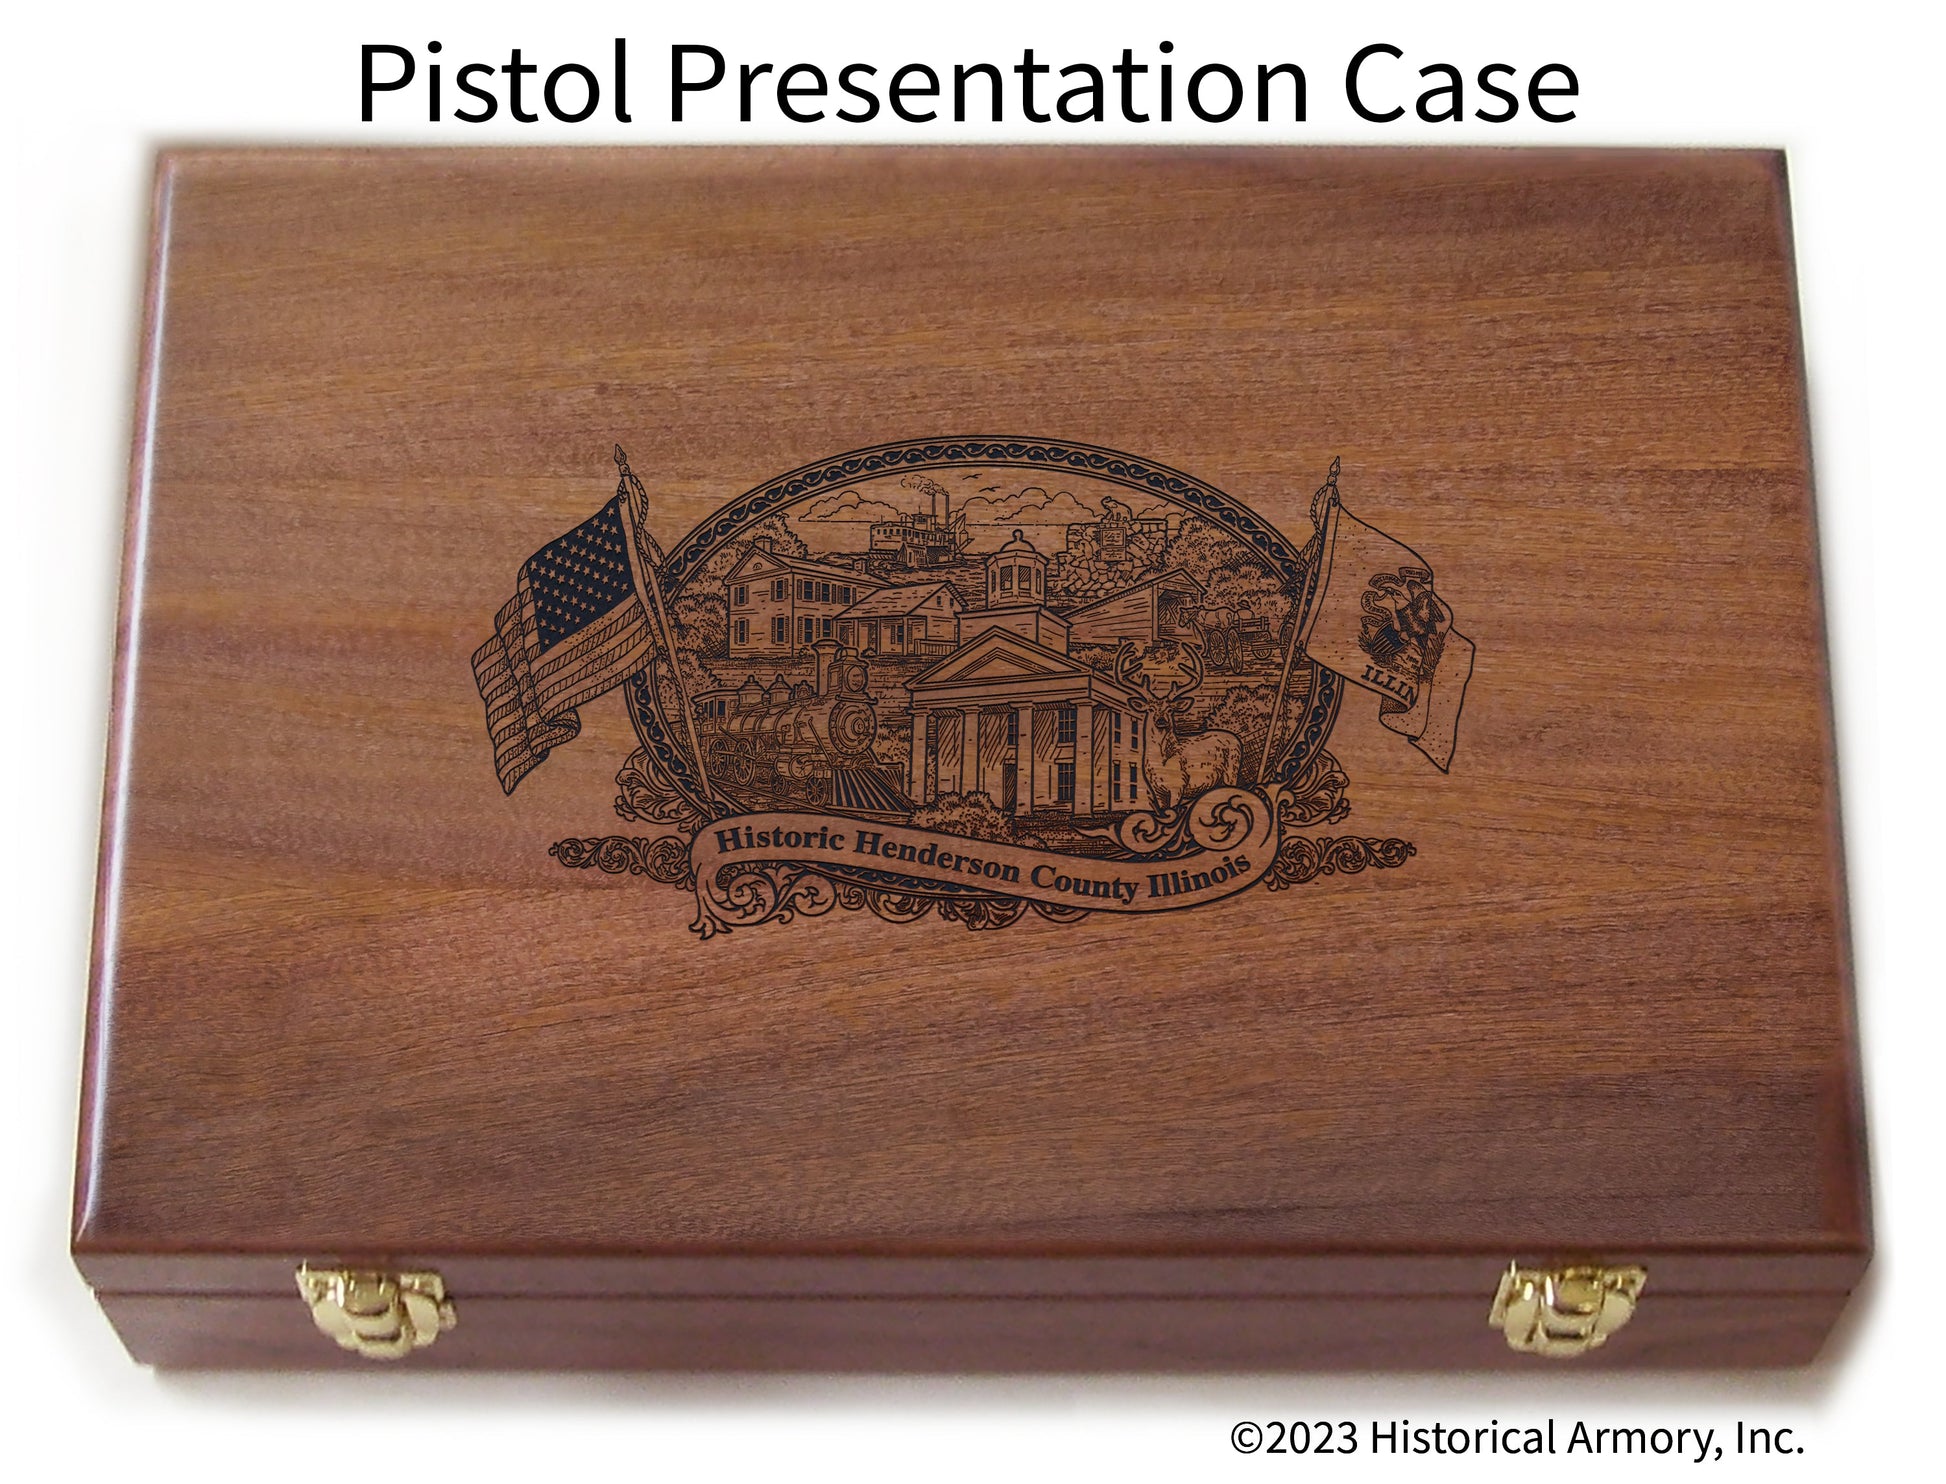 Henderson County Illinois Engraved .45 Auto Ruger 1911 Presentation Case